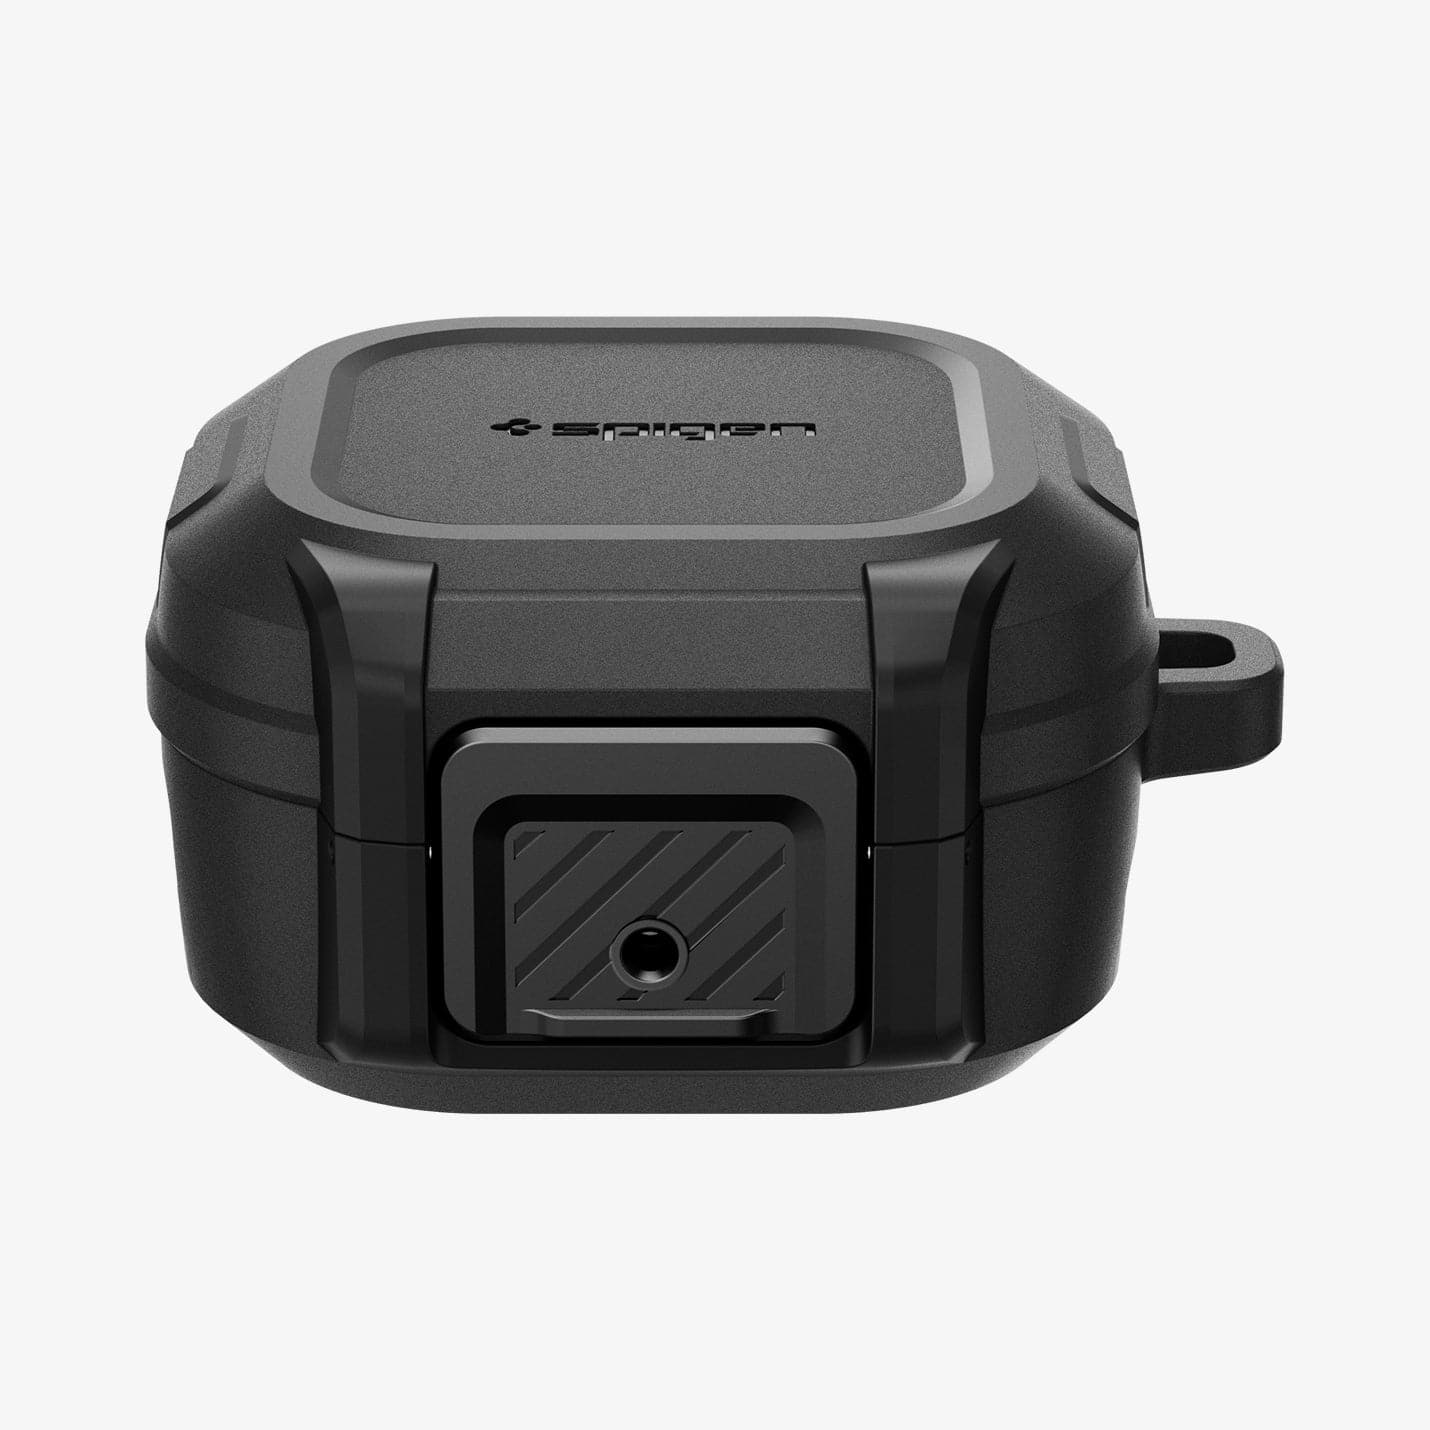 ACS05264 - Galaxy Buds 2 Pro / 2 / Pro / Live Case Lock Fit in matte black showing the front and partial top